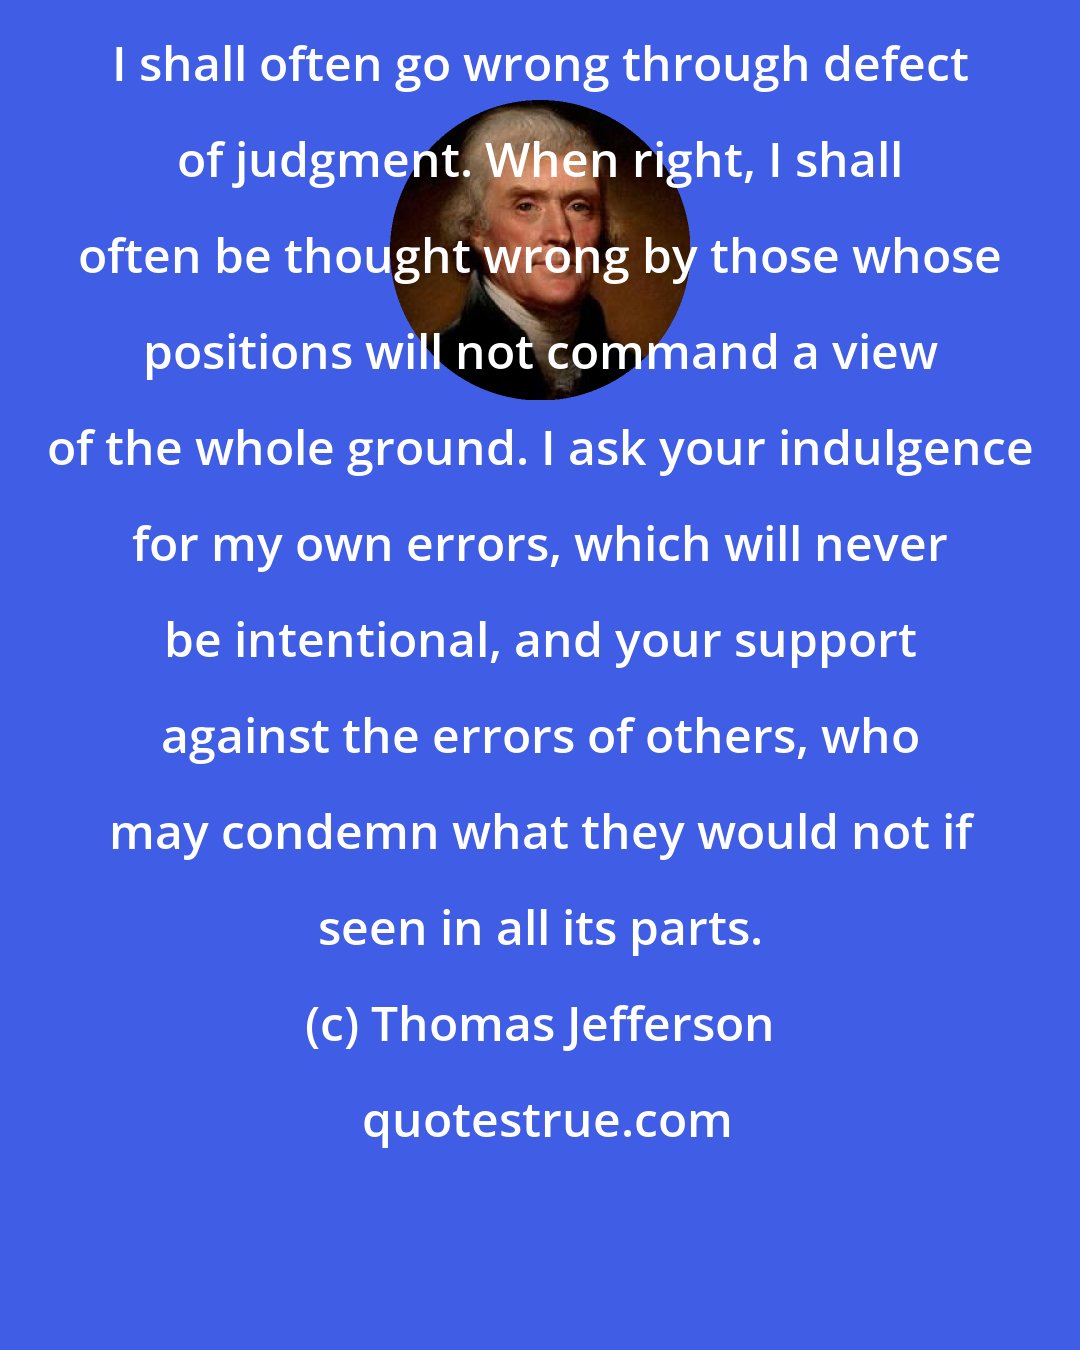 Thomas Jefferson: I shall often go wrong through defect of judgment. When right, I shall often be thought wrong by those whose positions will not command a view of the whole ground. I ask your indulgence for my own errors, which will never be intentional, and your support against the errors of others, who may condemn what they would not if seen in all its parts.